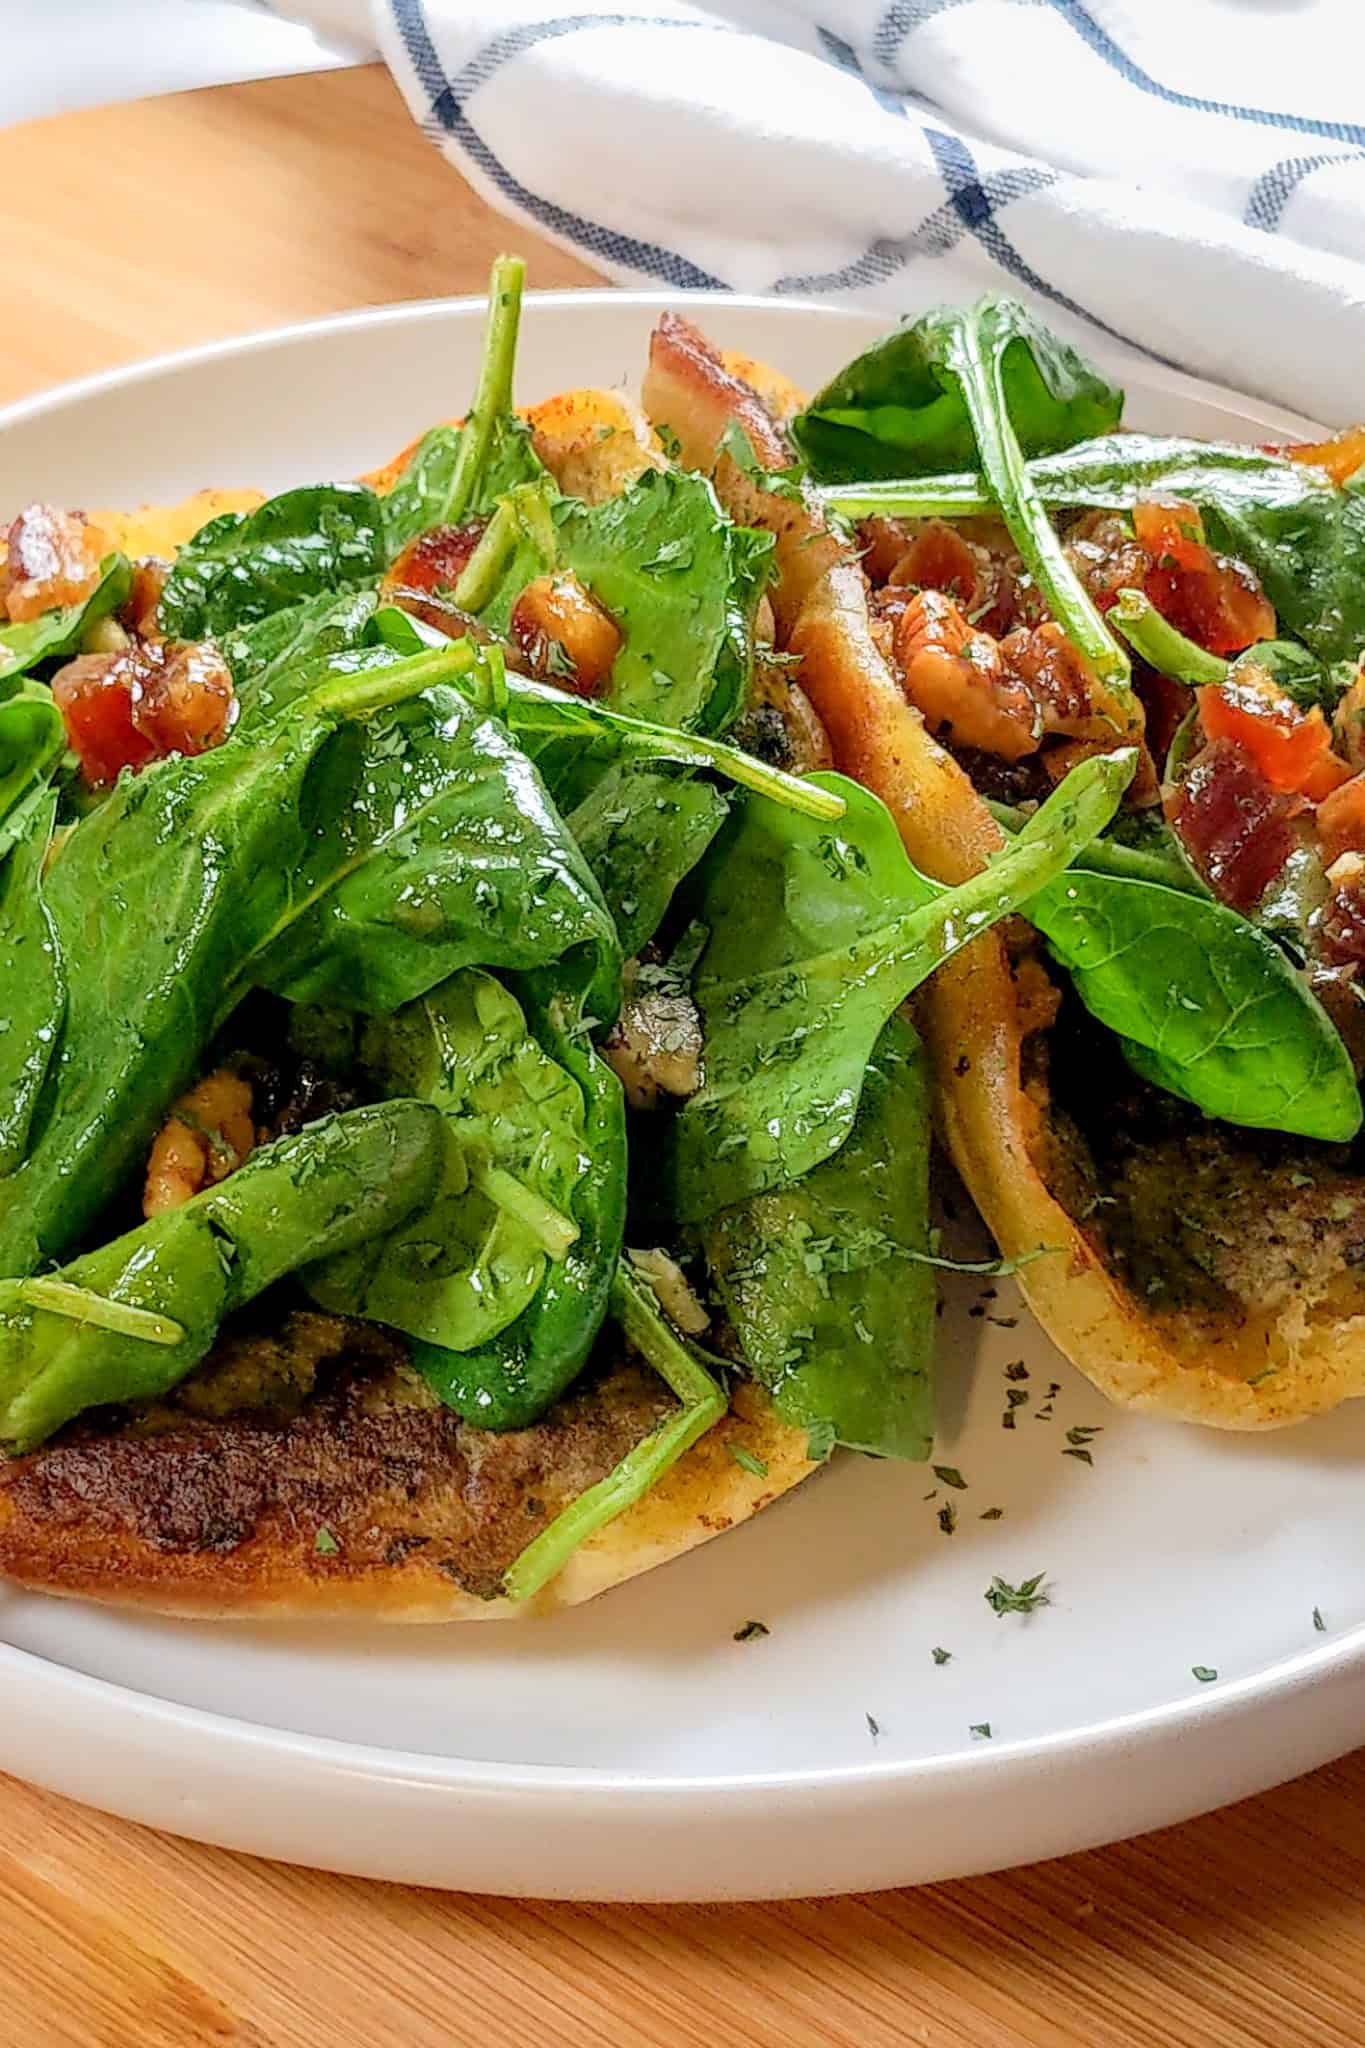 pan-fried pita bread with a layer of cooked zhug spiced ground chicken topped with spinach in a pomegranate vinaigrette with dates and pecans on a round plate with shallow straight sides.